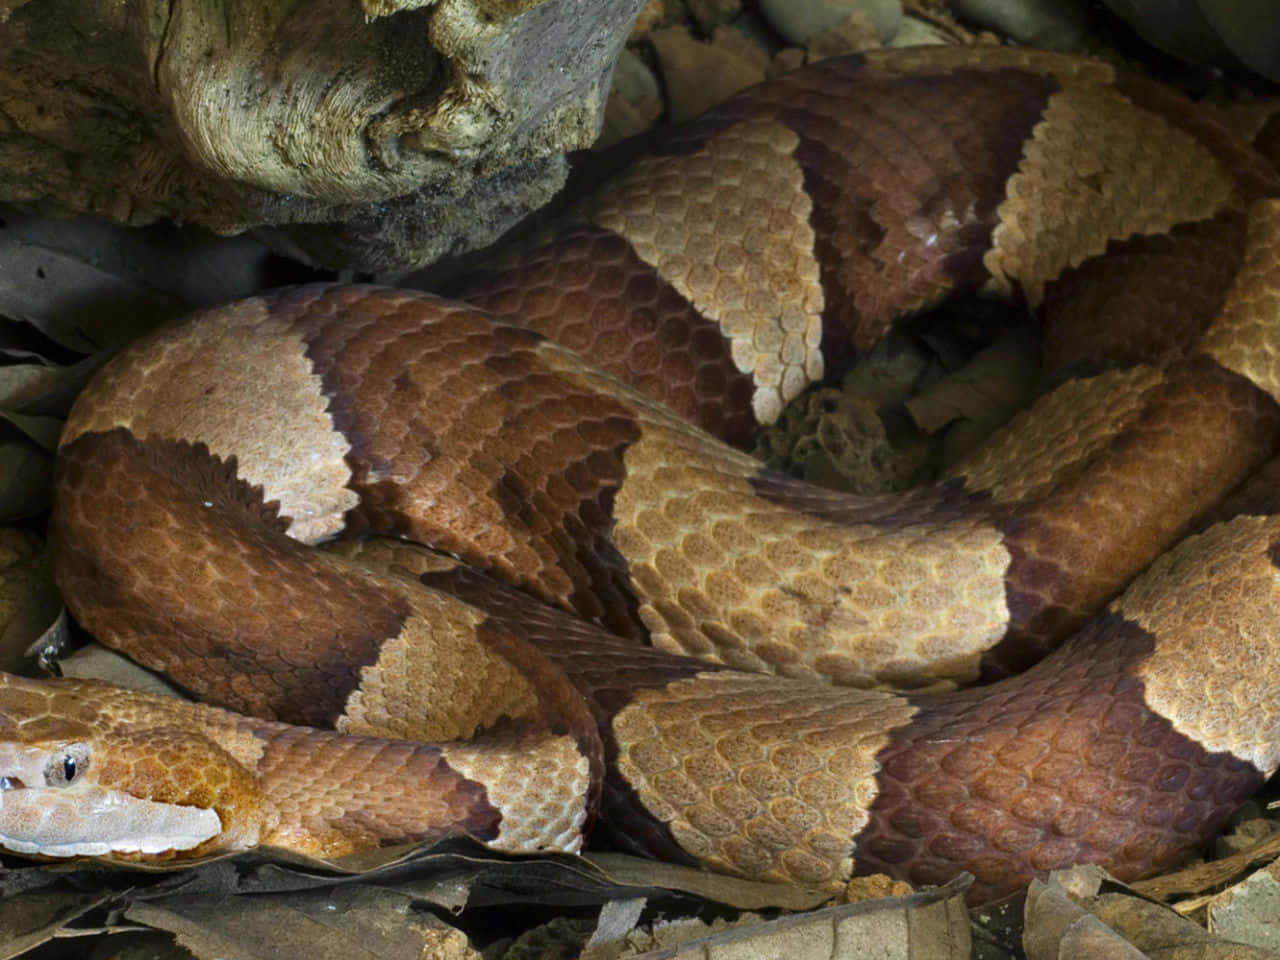 An intimidating copperhead snake ready to strike